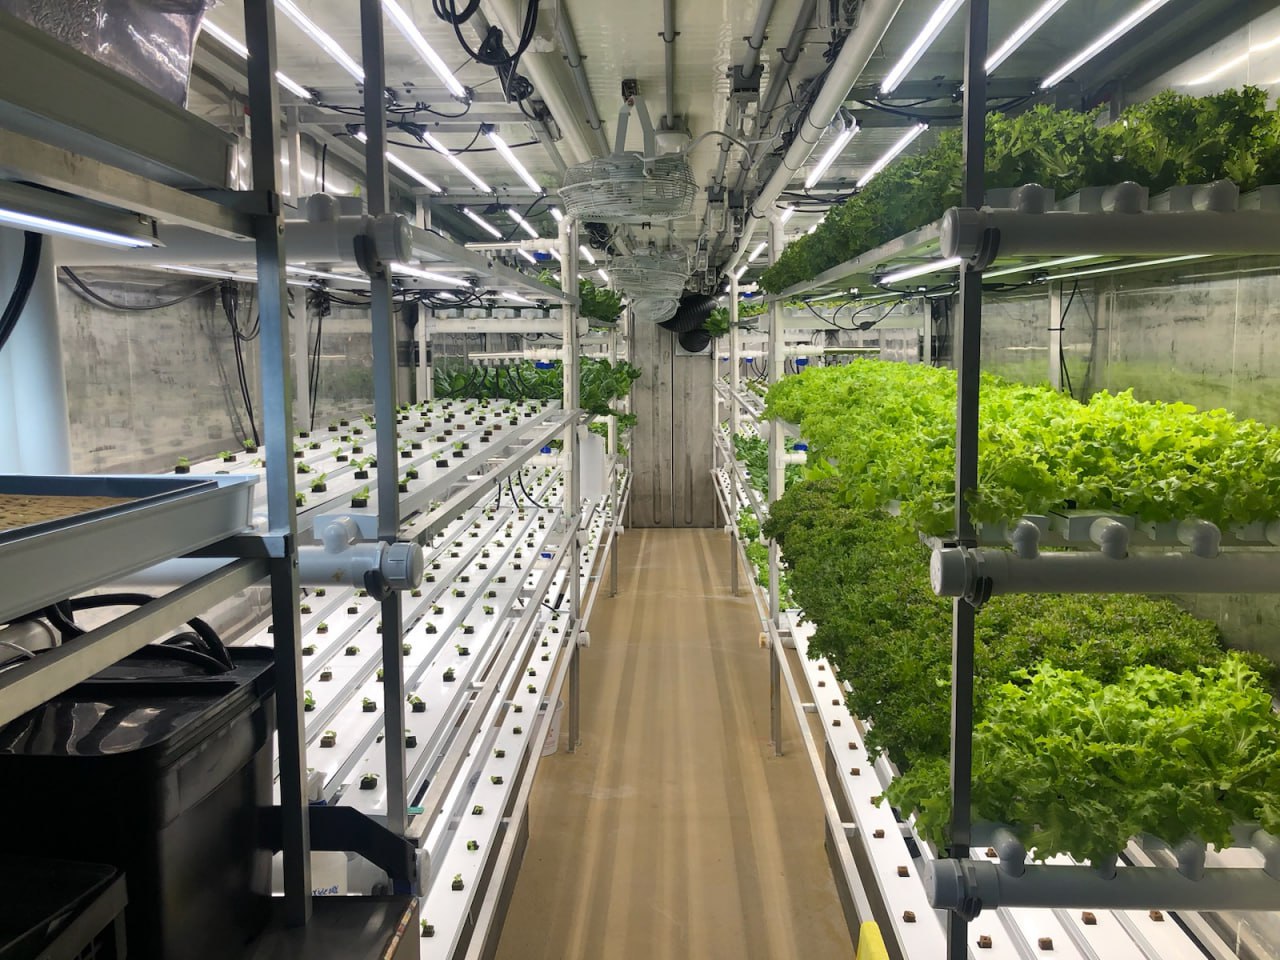 Vertical farming with LED light for indoor agriculture